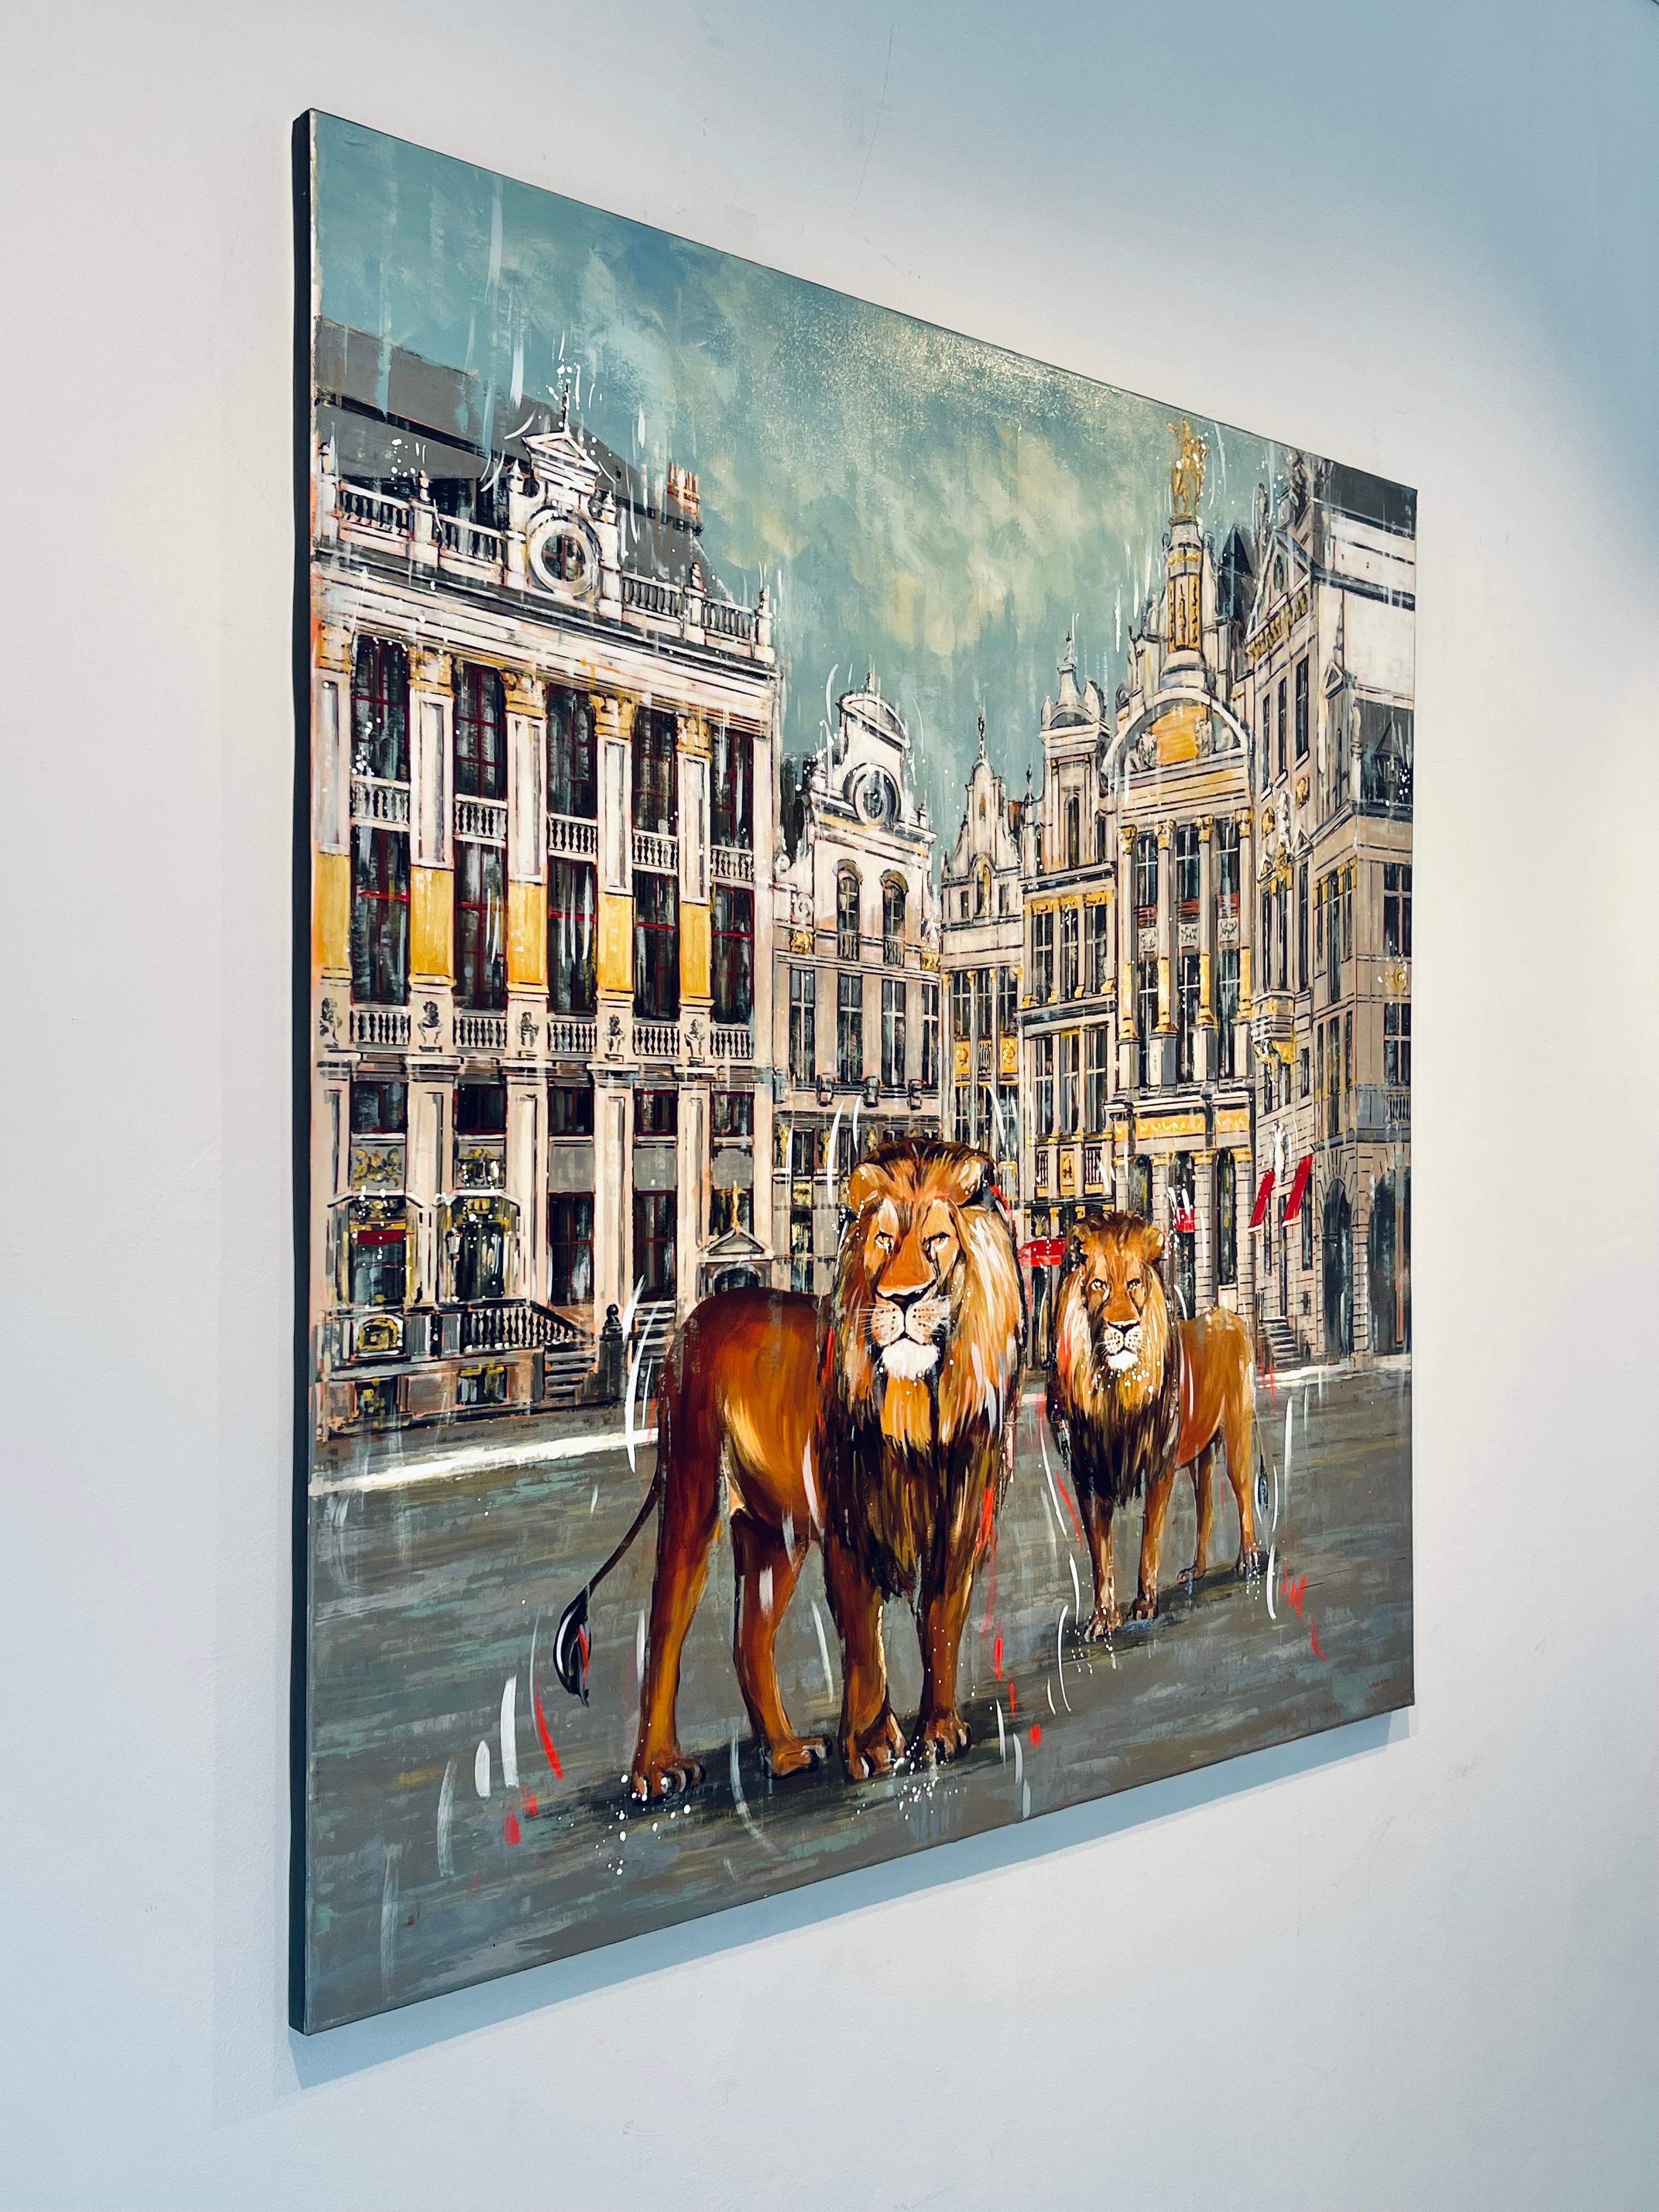 Grande Place-original cityscape wildlife animal architecture-modern art  - Surrealist Painting by Nathan Neven